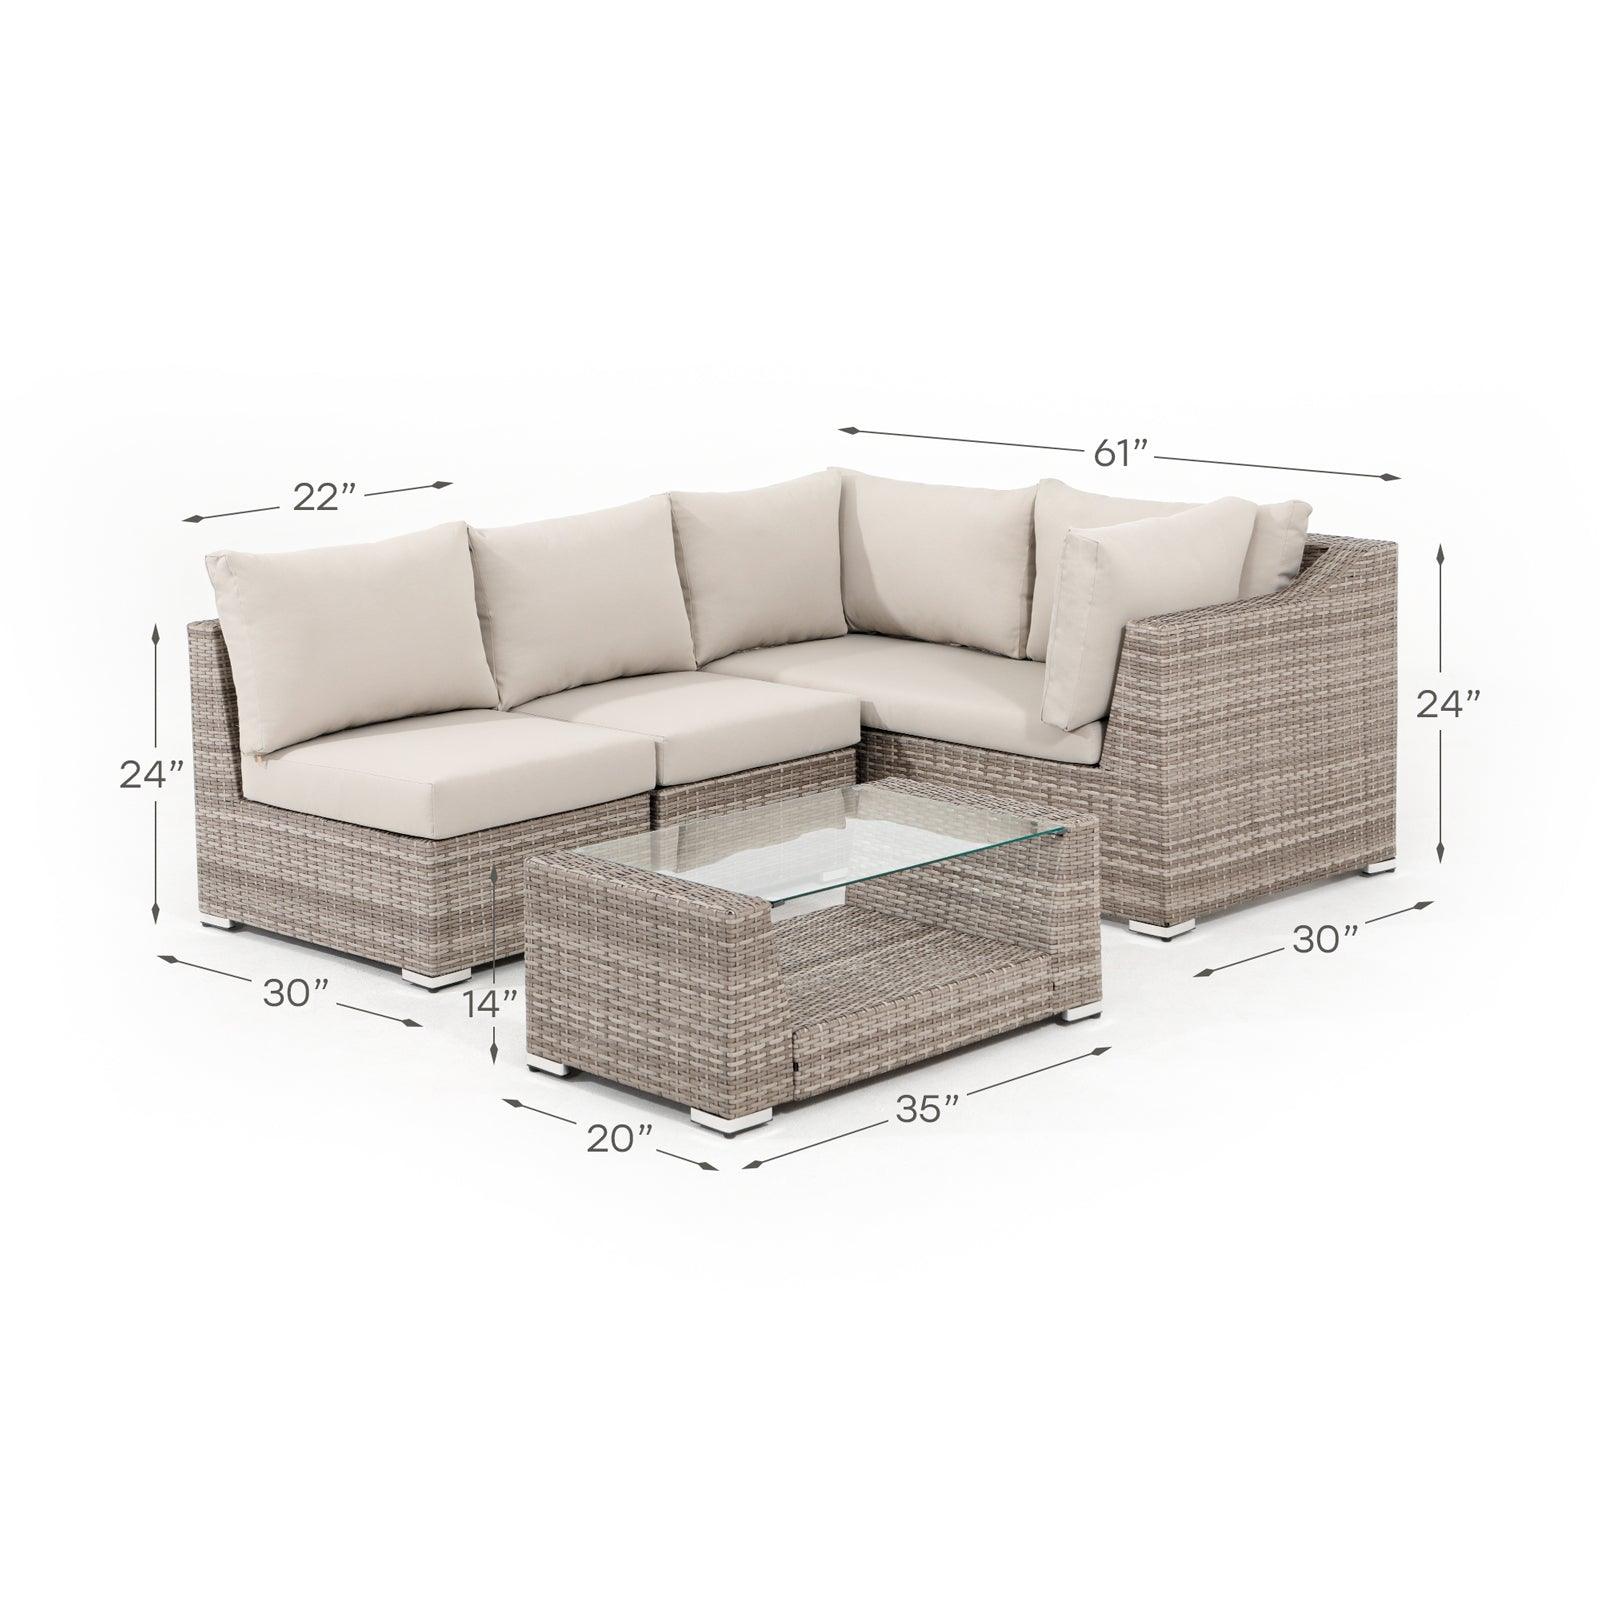 Elba Grey Rattan Outdoor Sectional Sofa Set with grey cushions, 1 two-seater sofa, 2 single armless sofas, 1 rectangular coffee table with glass tabletop, dimension information - Jardina Furniture